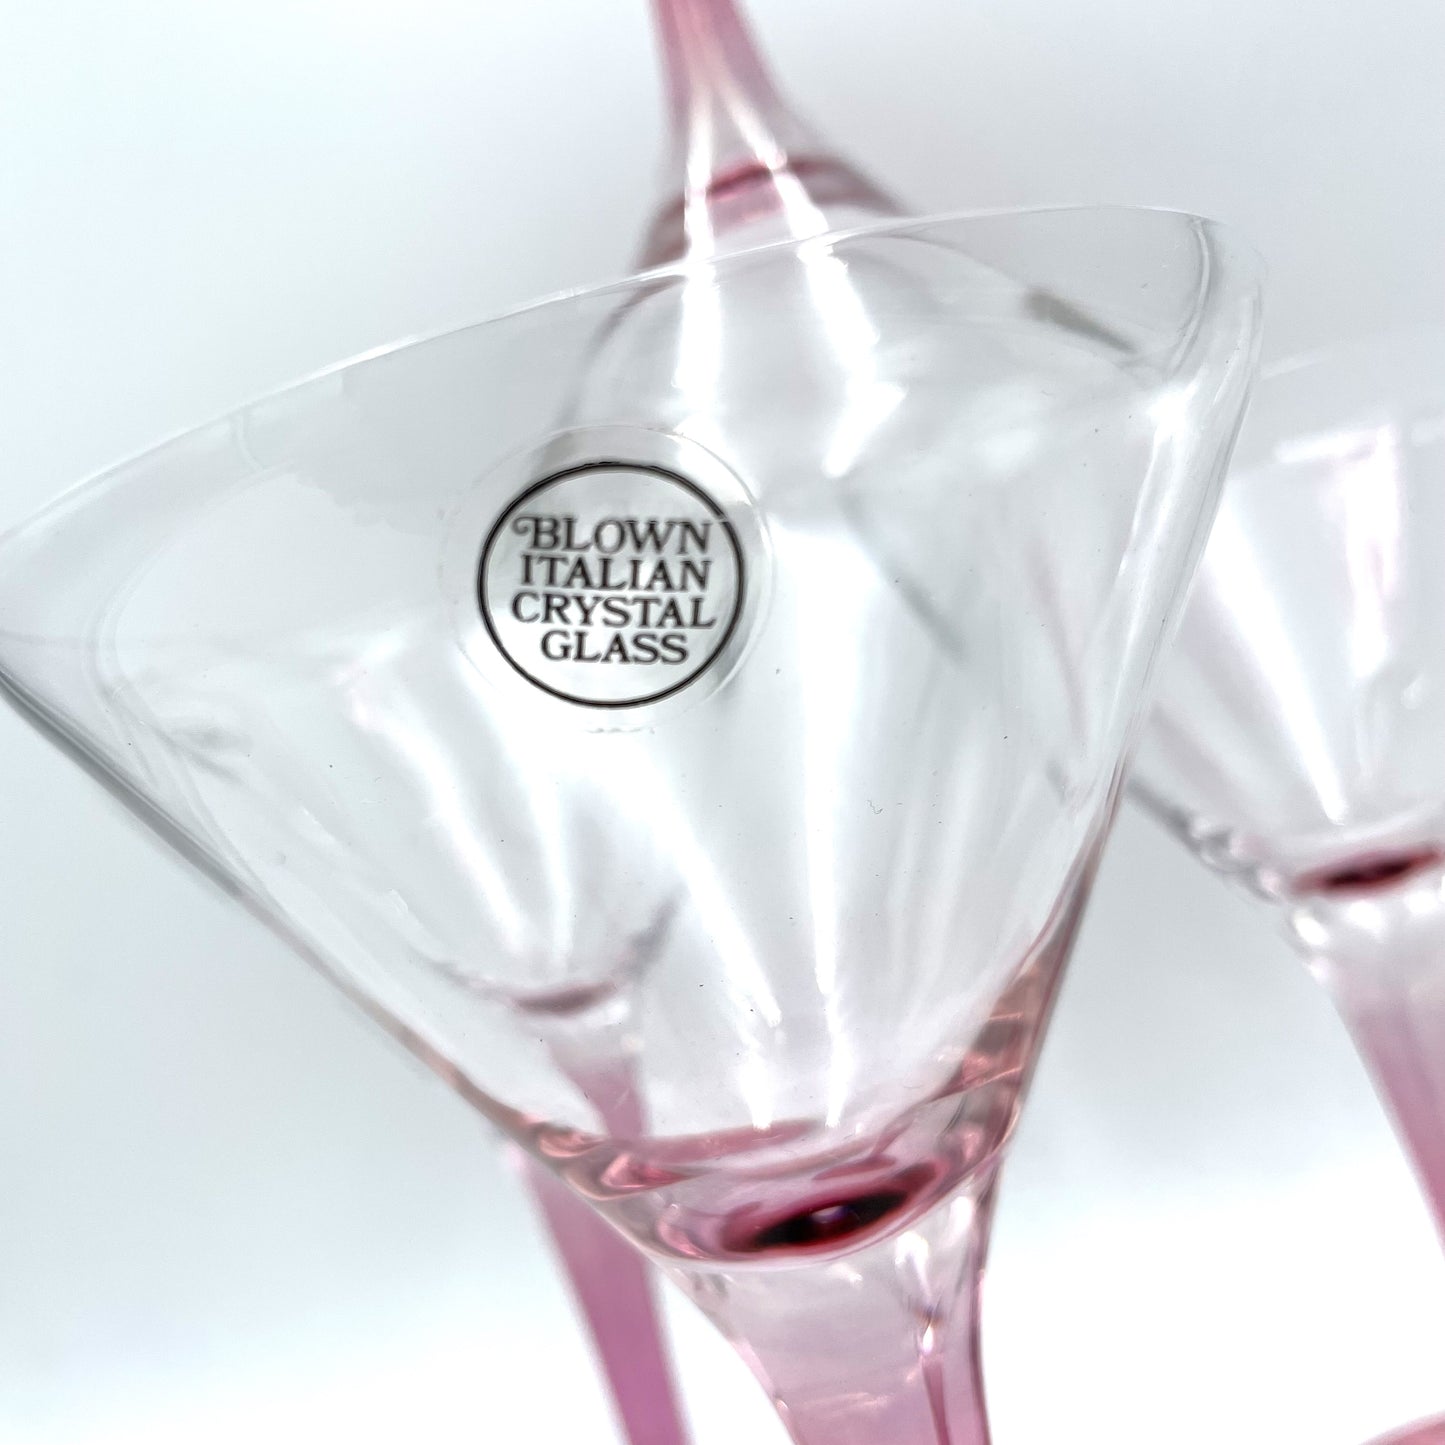 Four Handblown Pink Stem Martini Glasses made in Italy